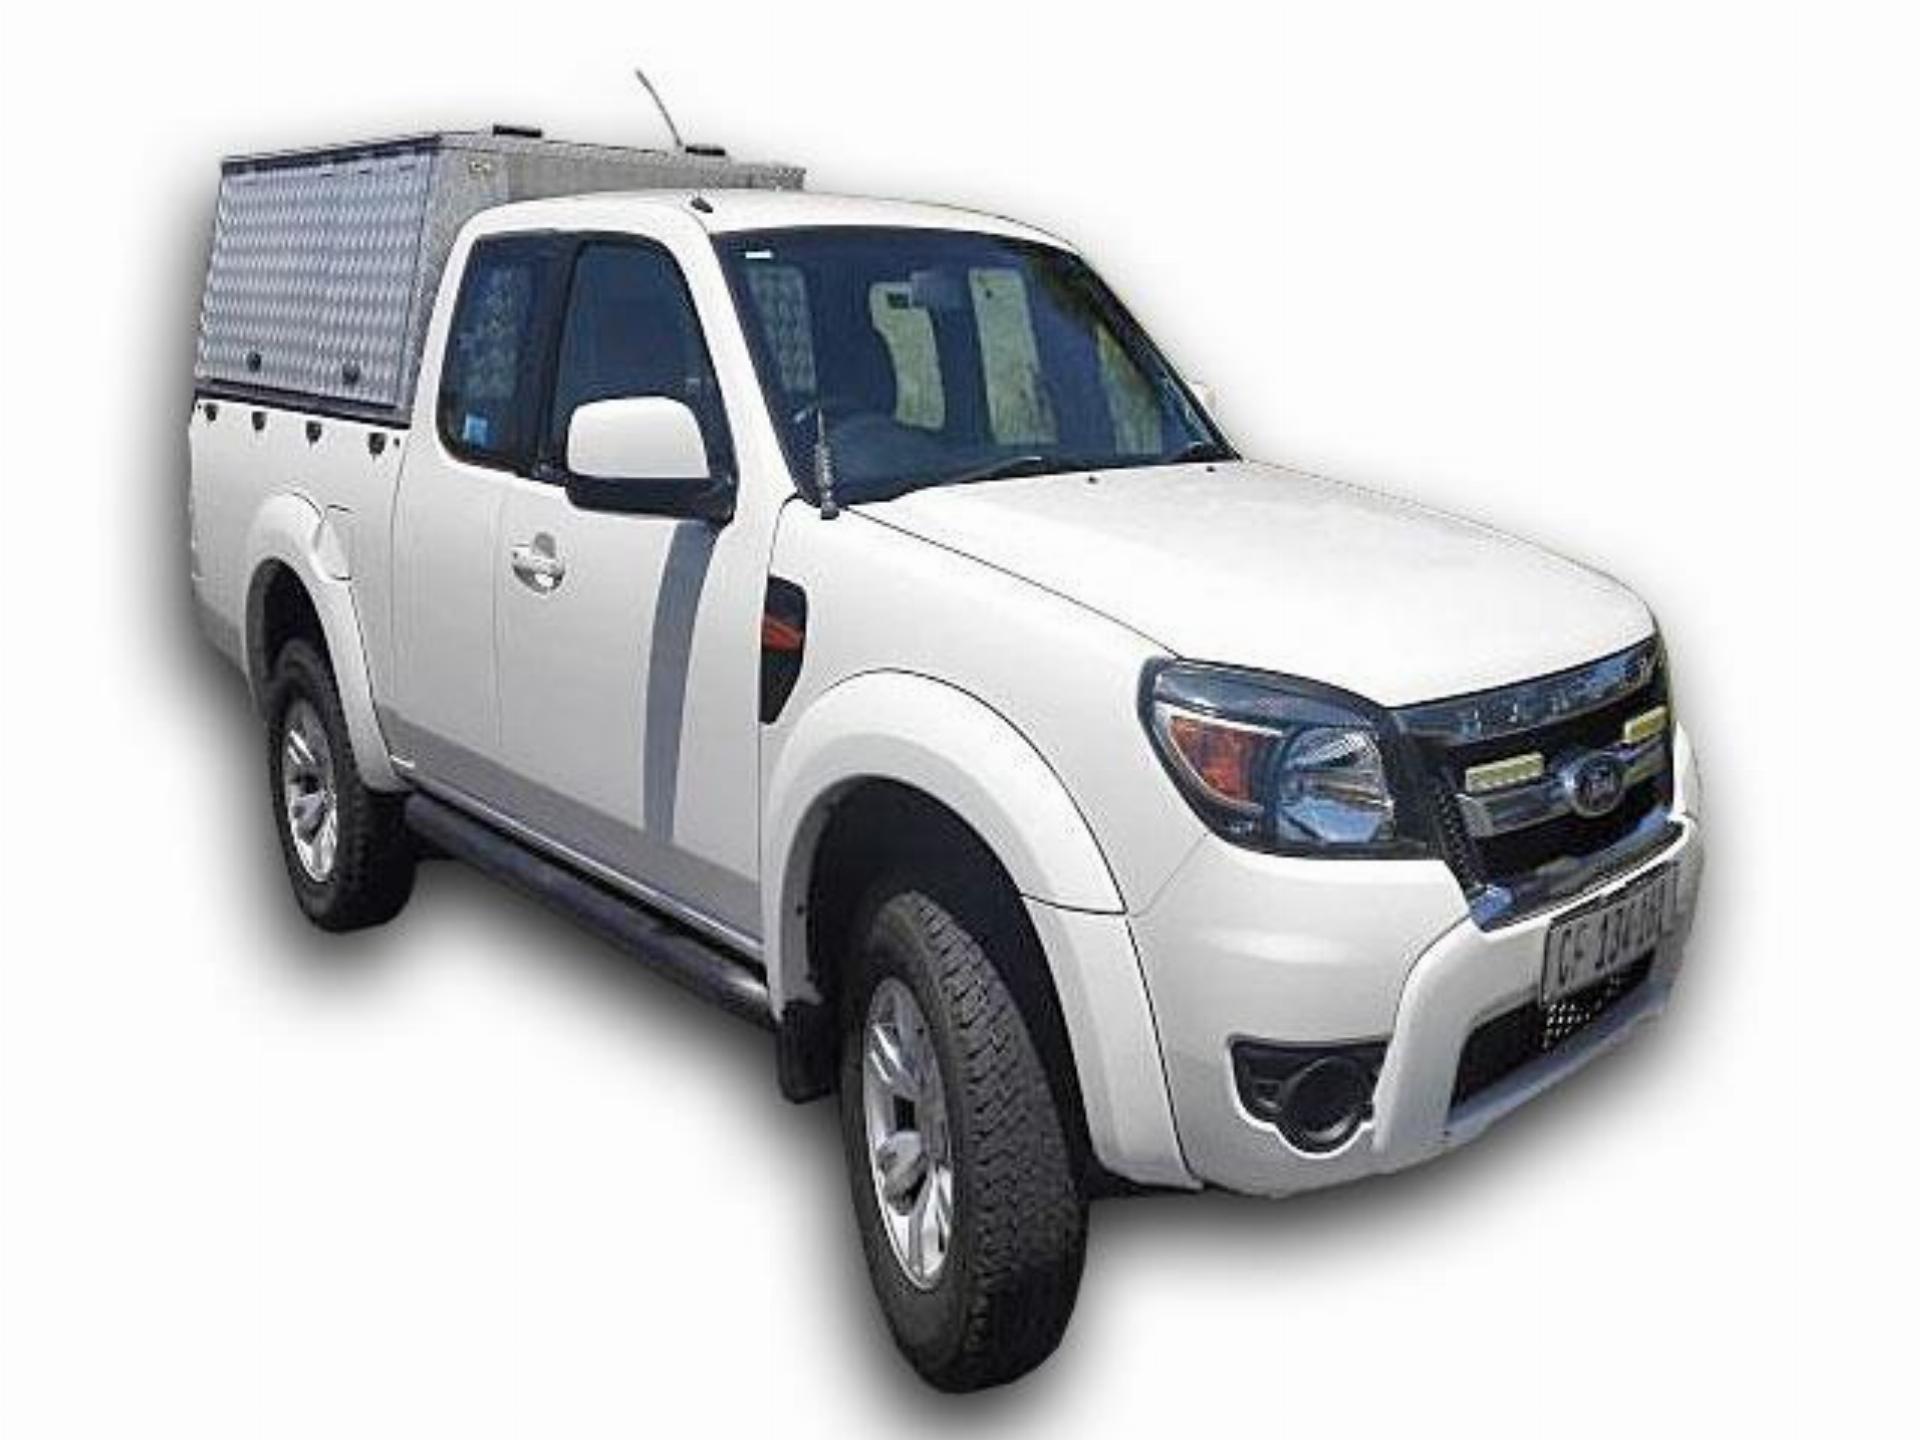 Ford Ranger 3.0 Tdci 4X4 Supercab - Reserved AT R135000 Only